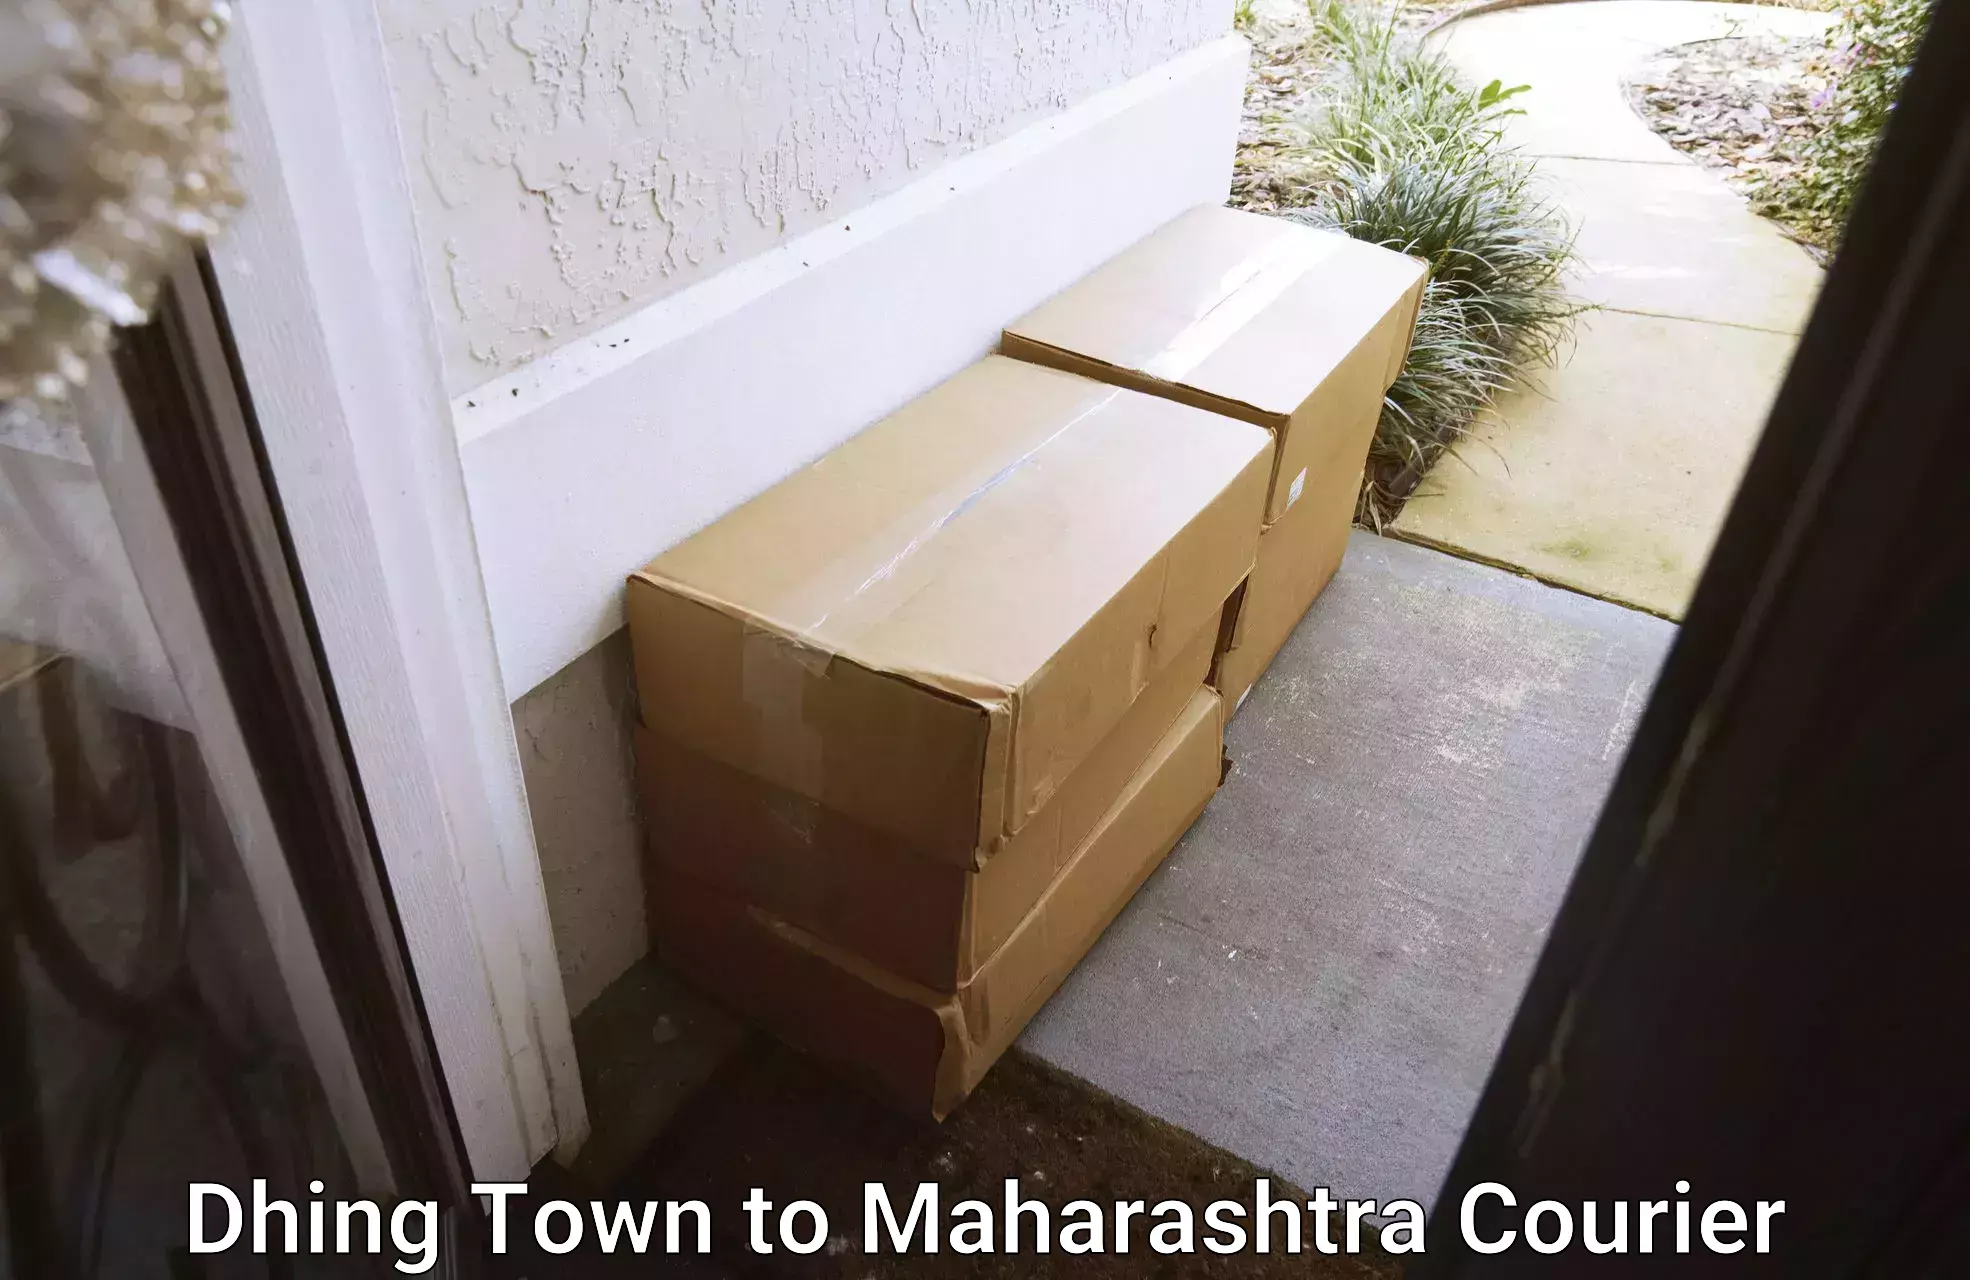 Premium courier solutions Dhing Town to Maharashtra